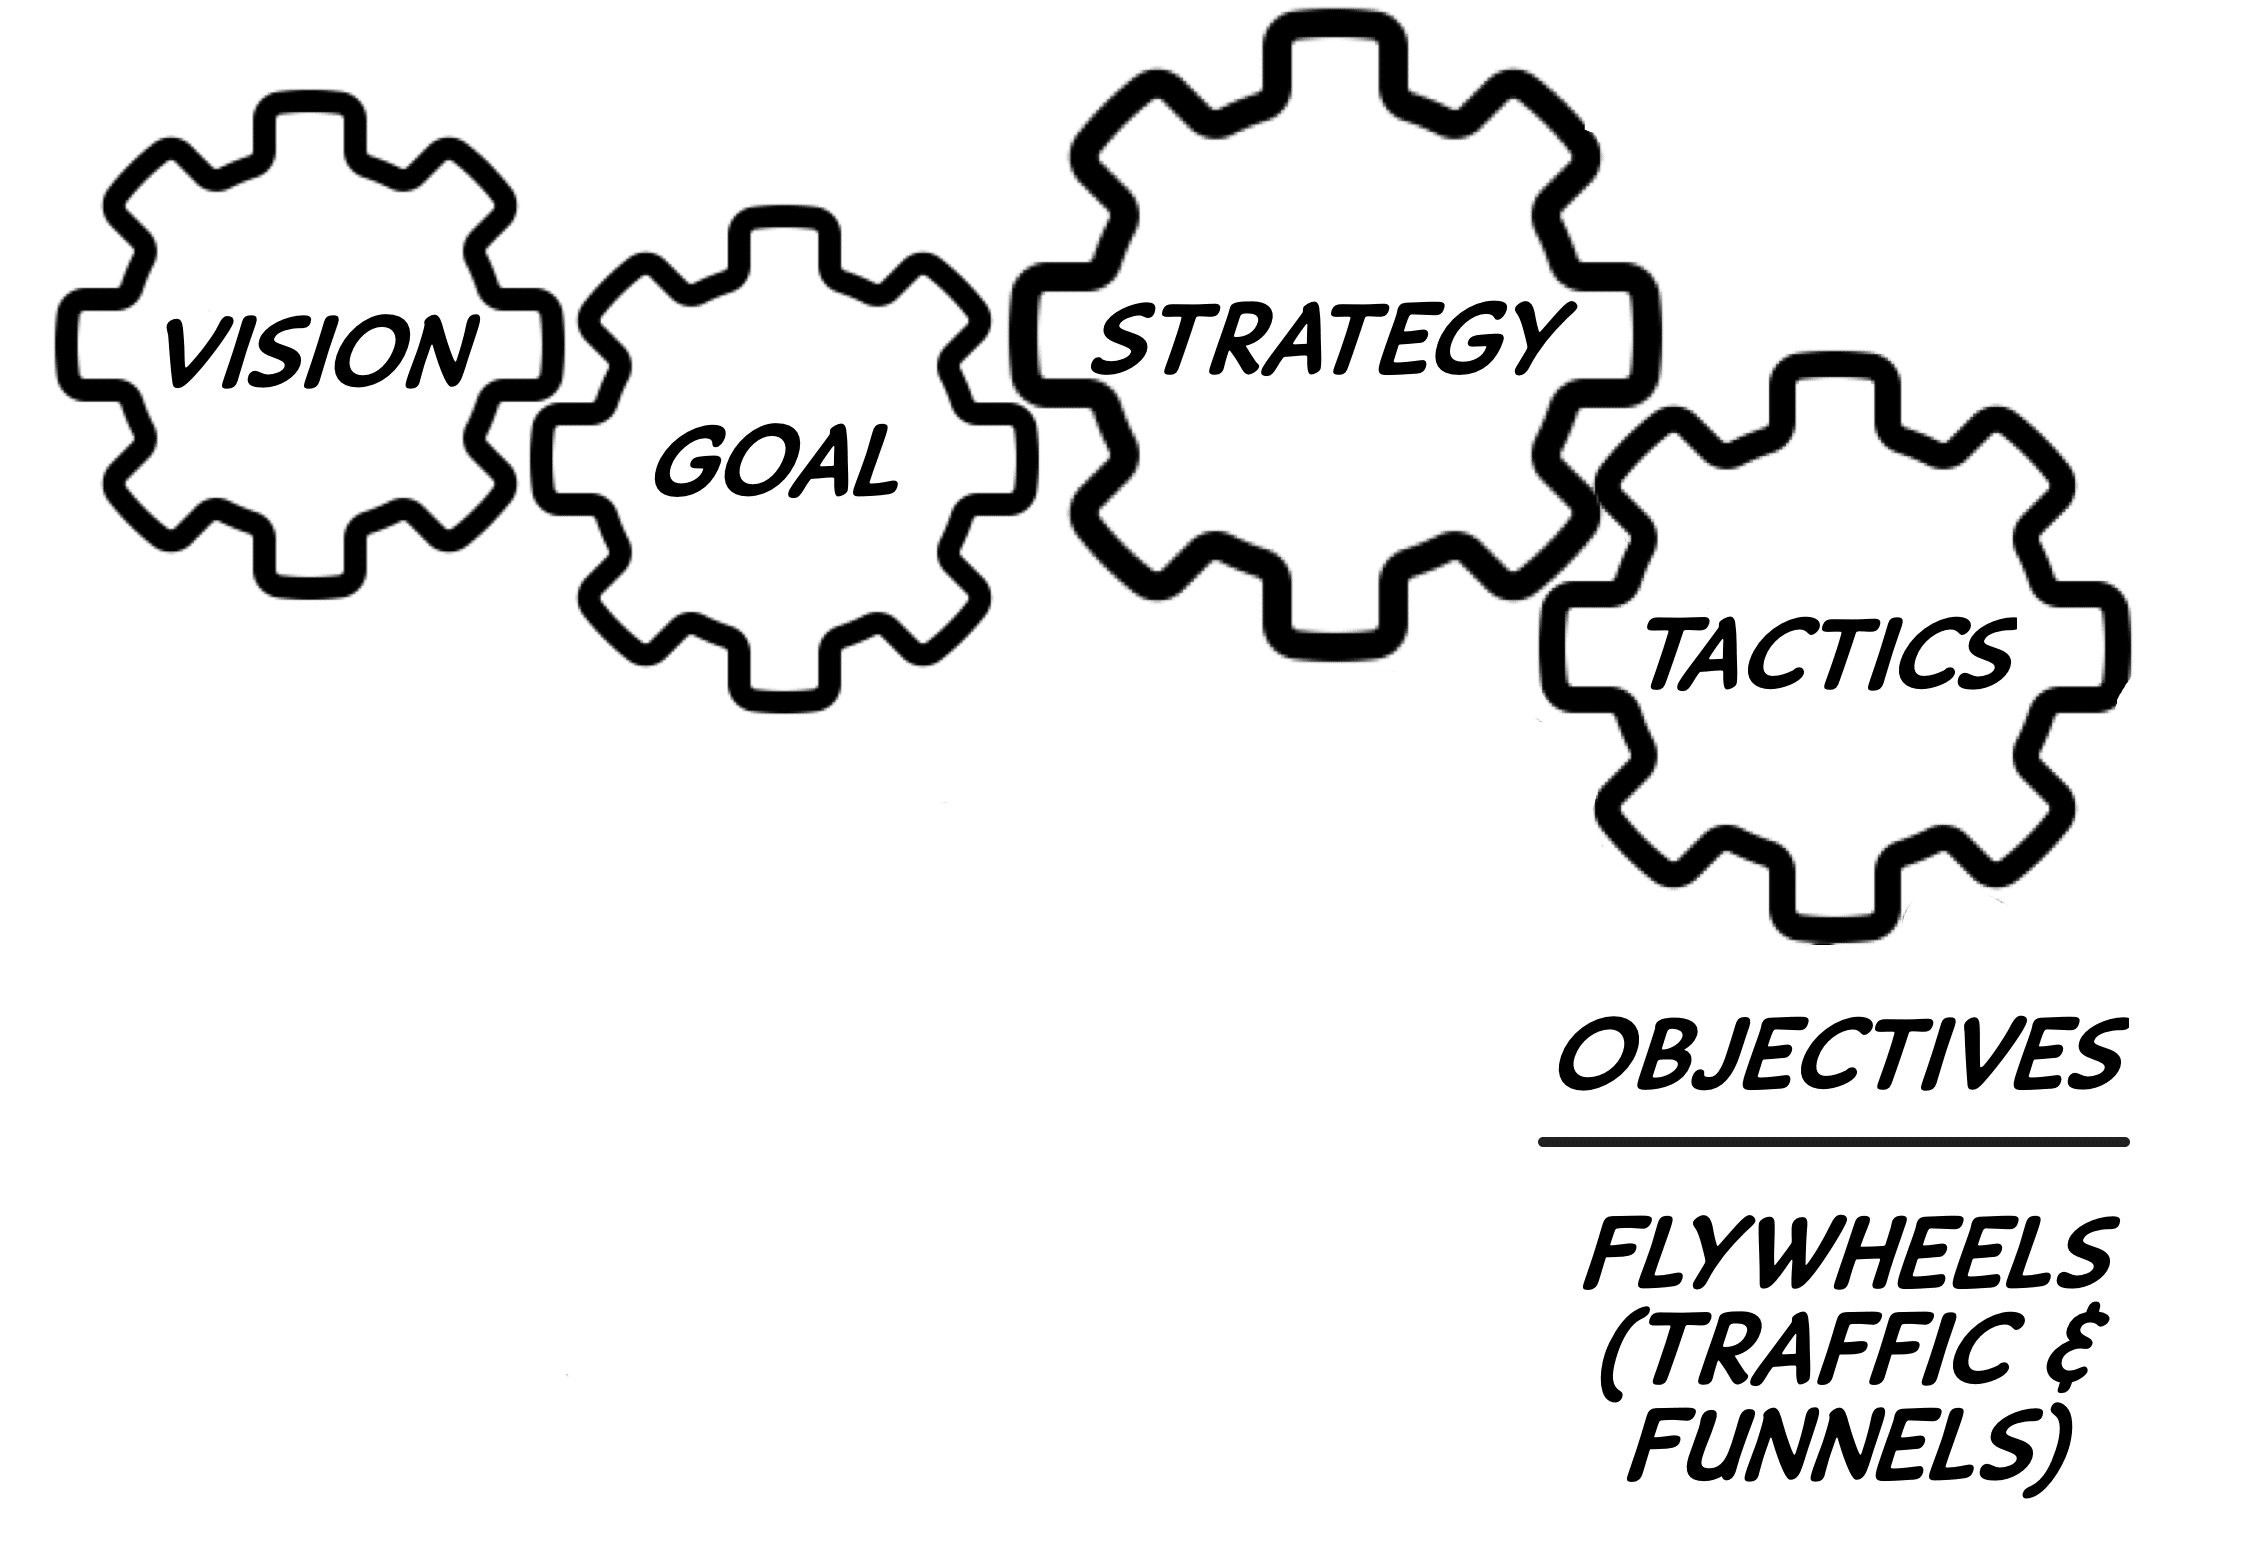 Tactics: The operational side of the strategy